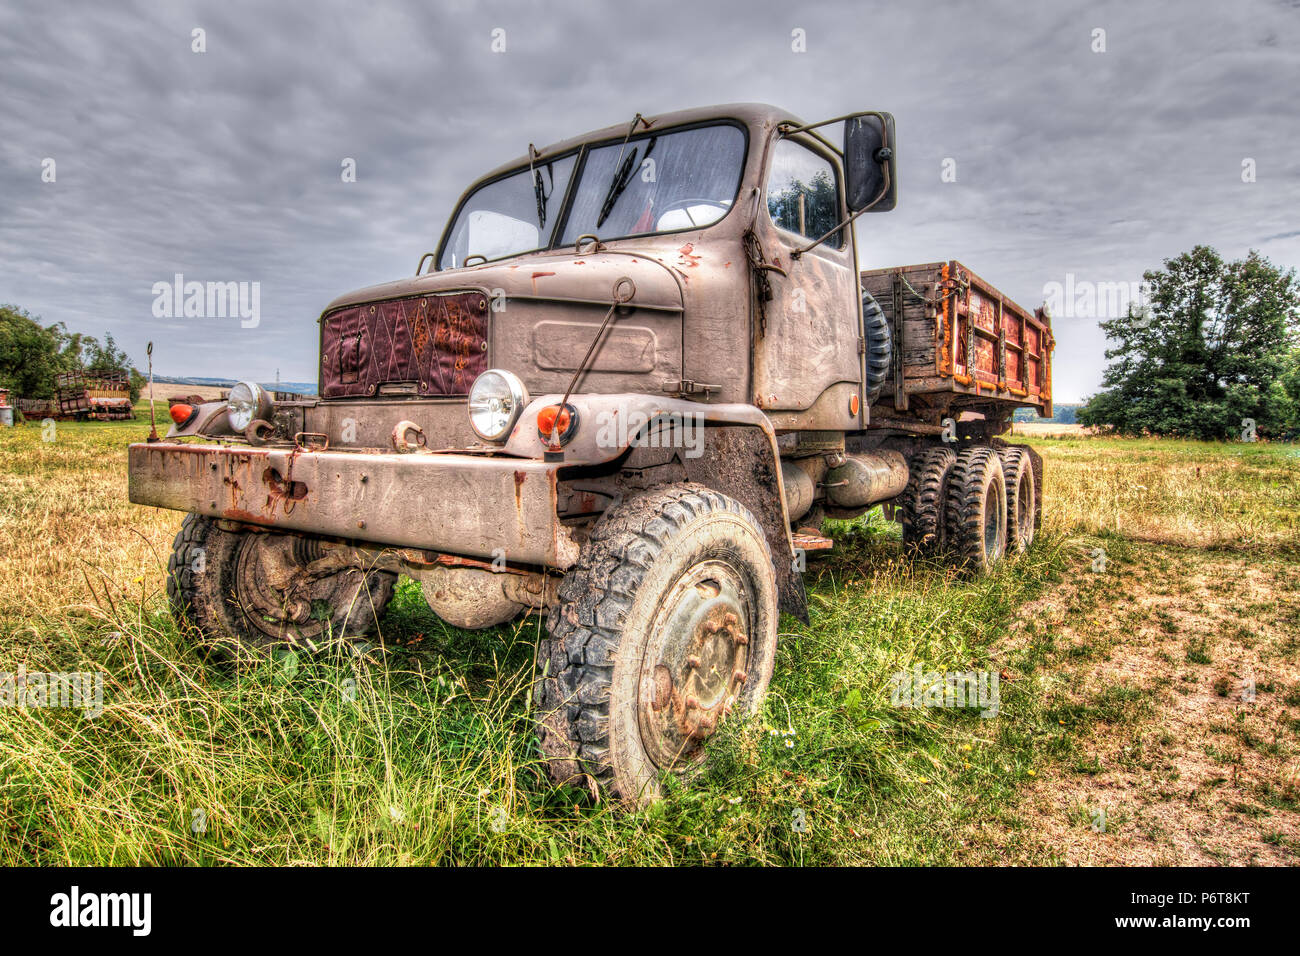 Image of the abandoned old rusty truck - terrain truck Praga V3S from 1953 Stock Photo